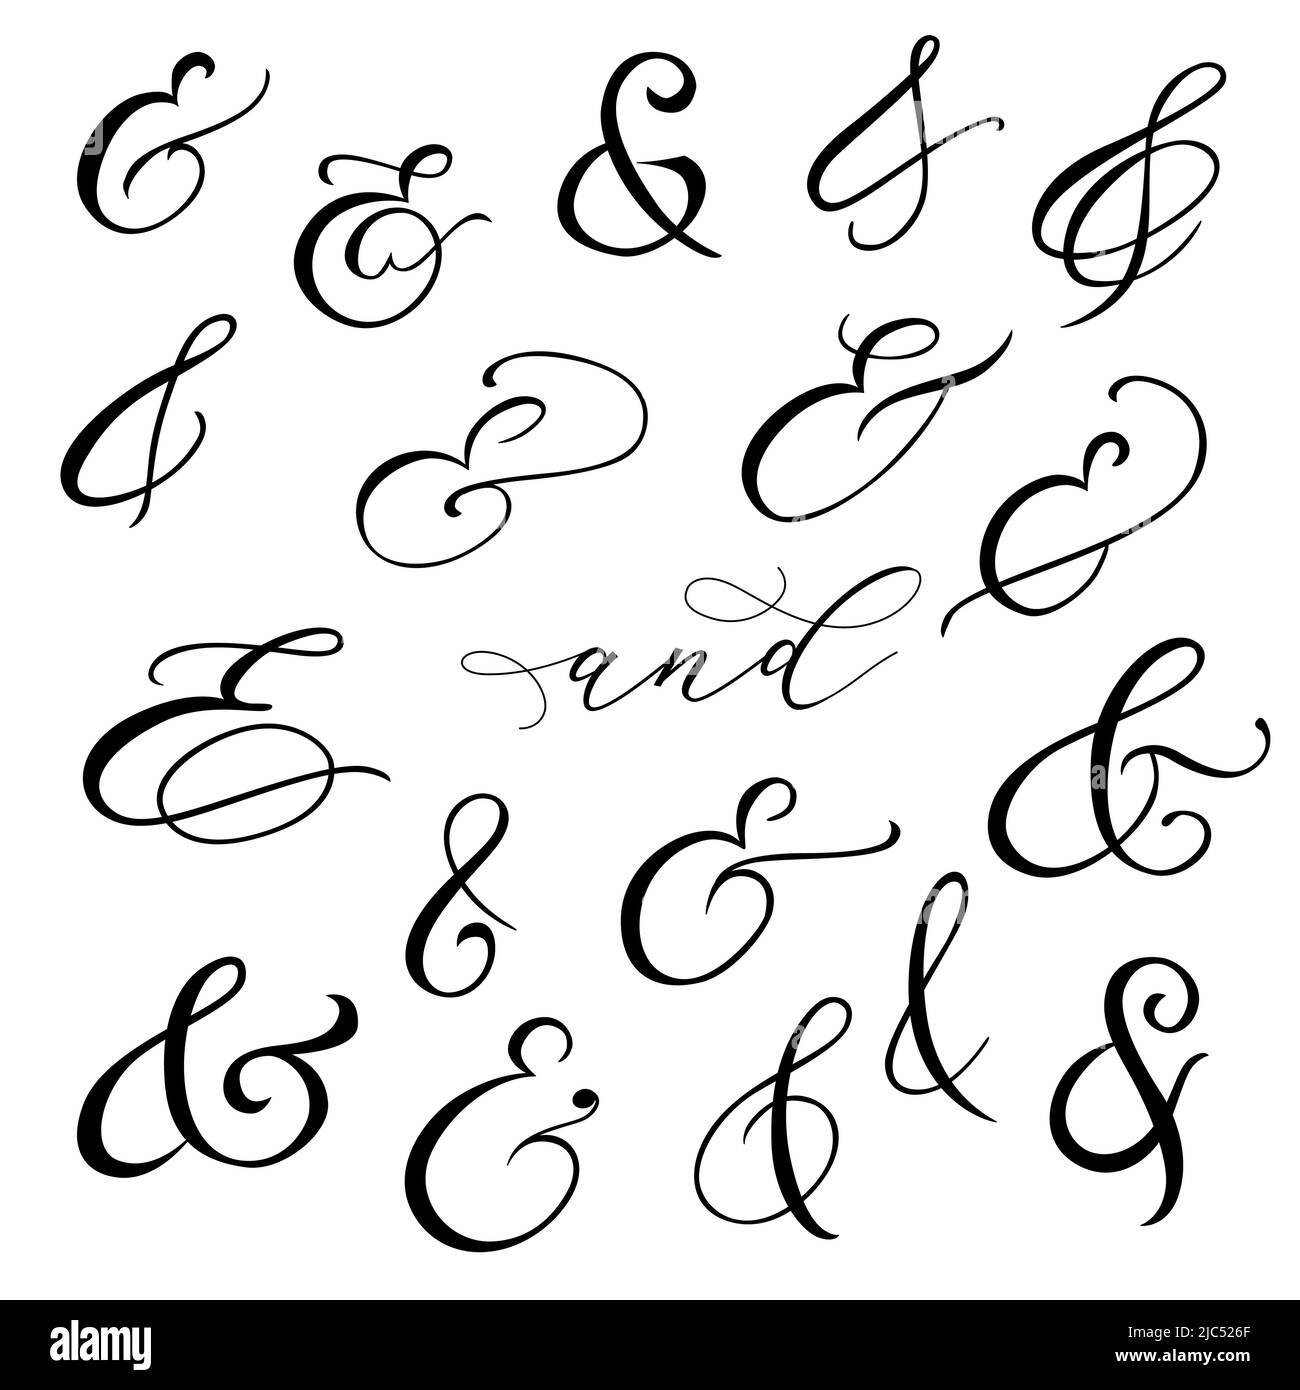 Hand drawn doodle ampersands curves book corners Vector Image